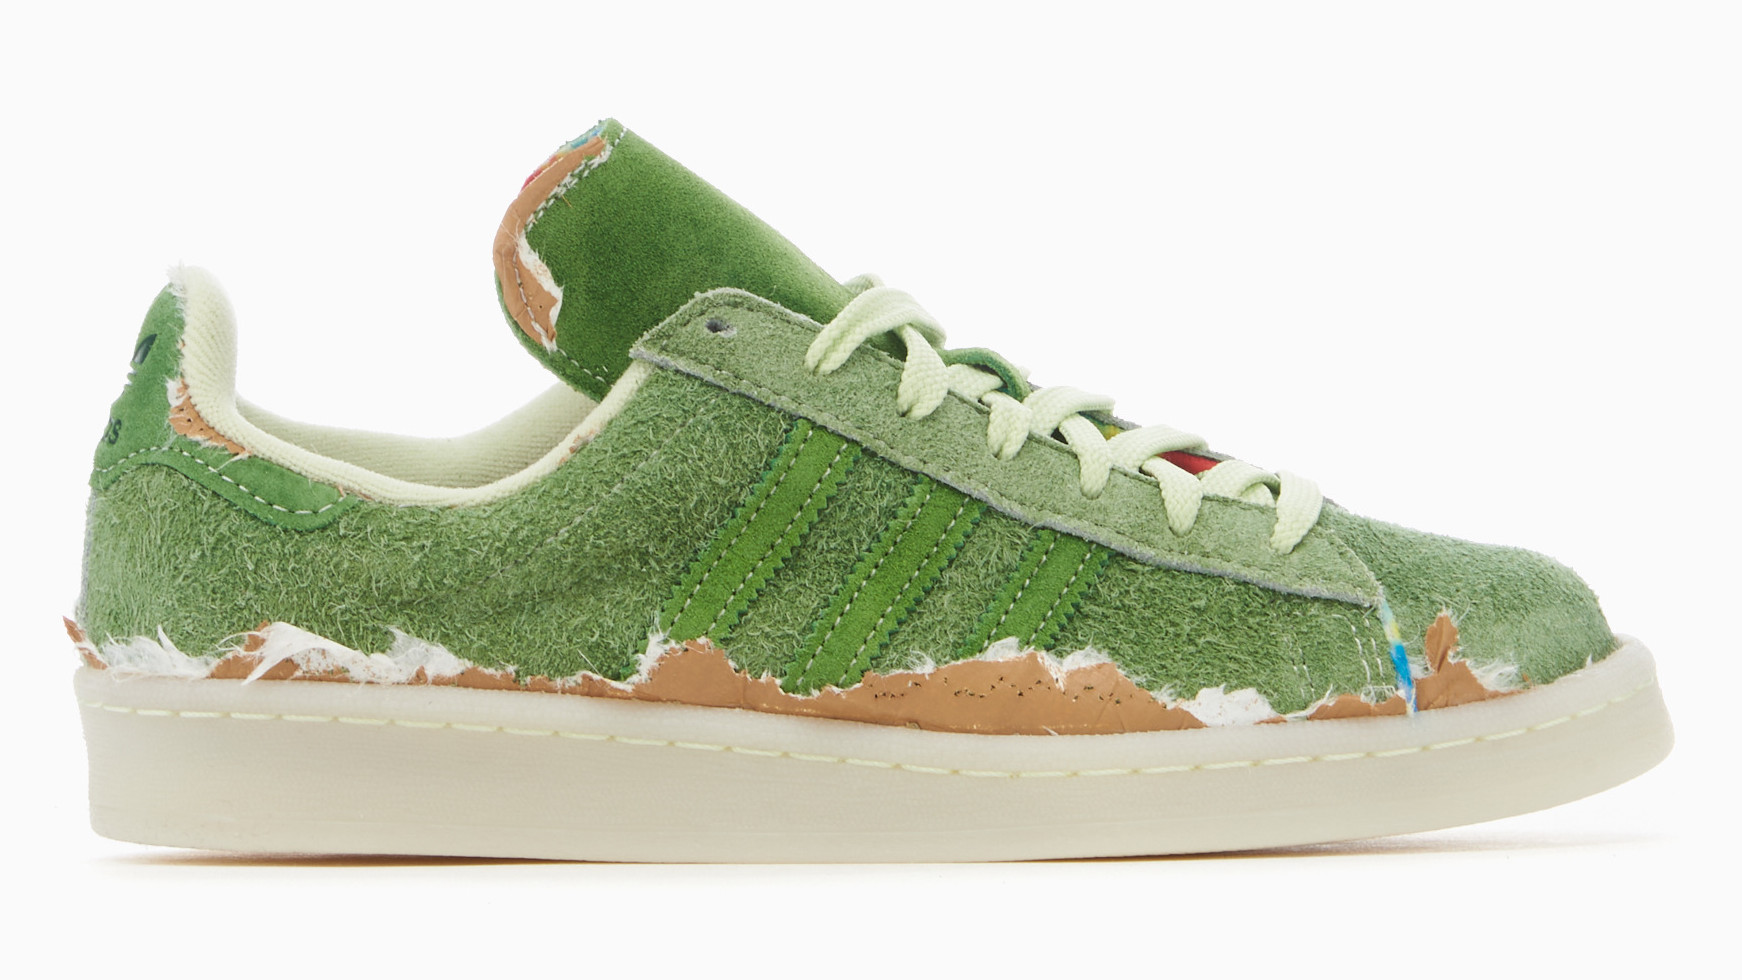 The 'Croptober' Adidas Campus 80s Feature Rolling Paper Uppers